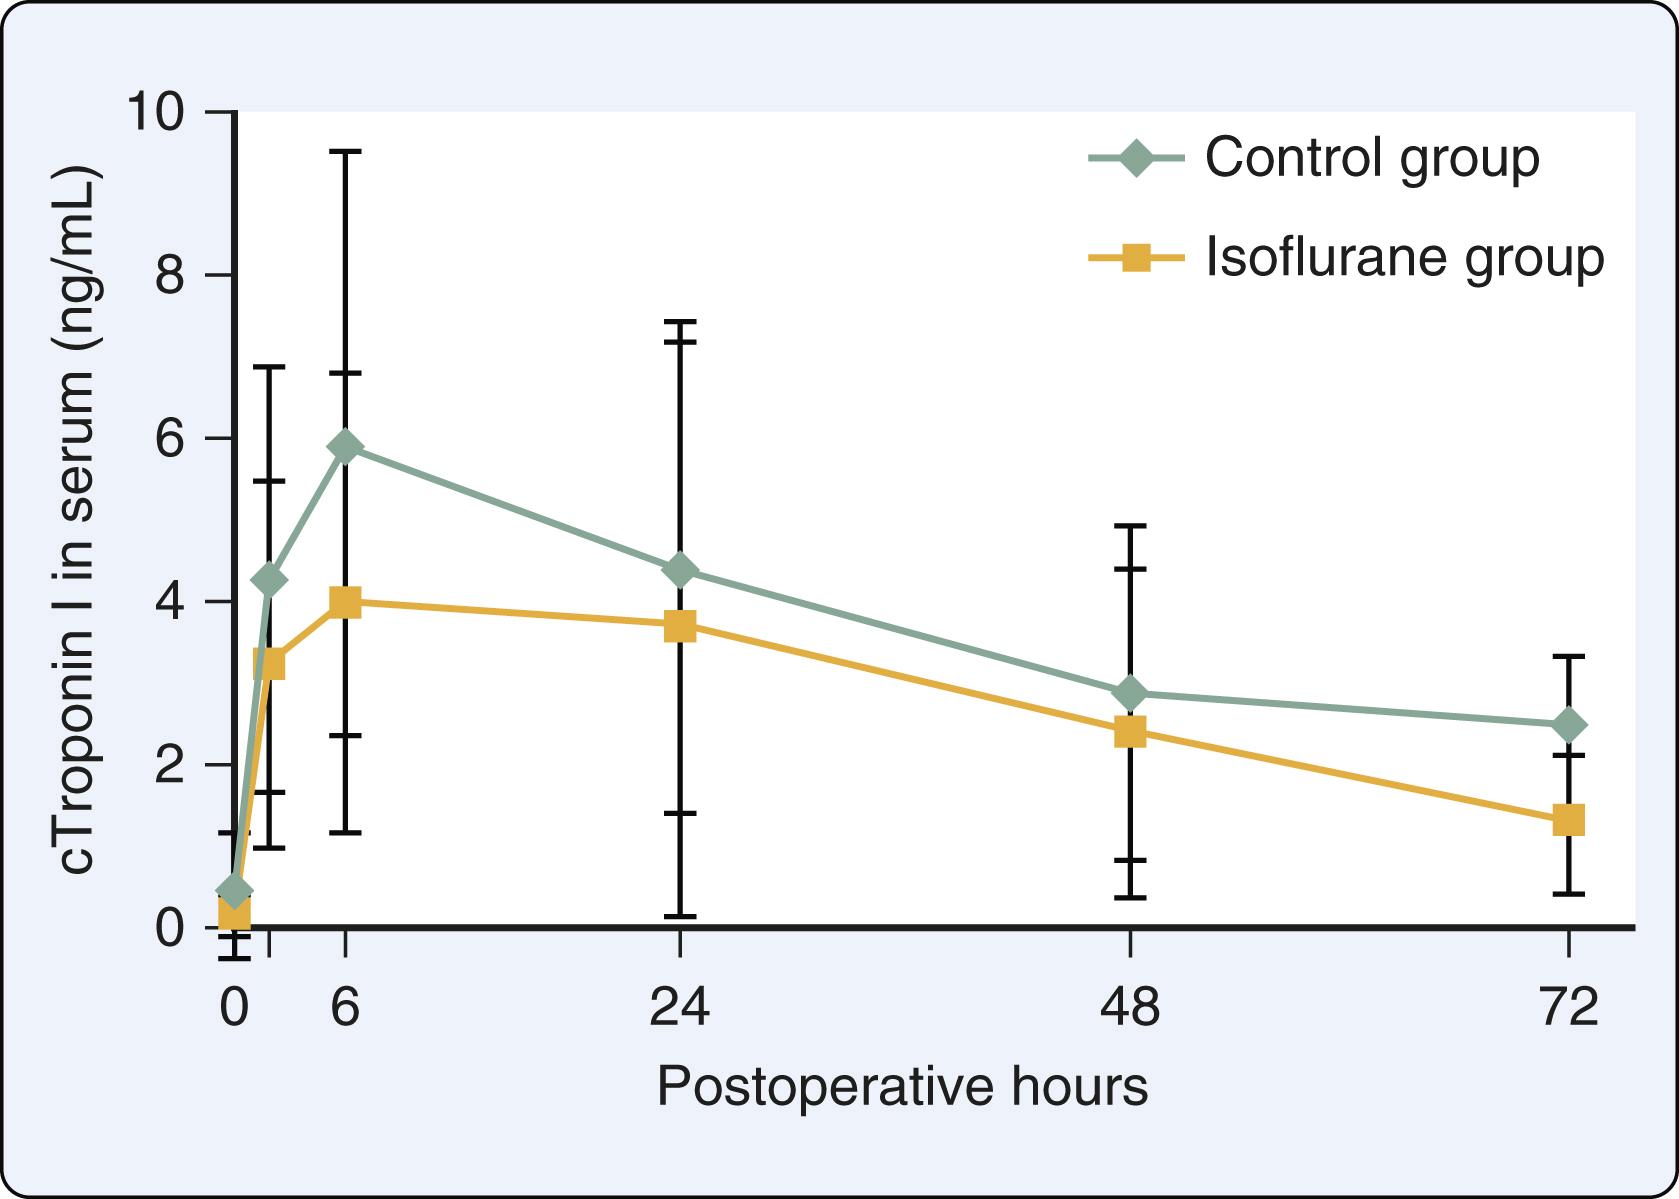 Figure 7.23, Effect of isoflurane preconditioning on postoperative troponin I release in patients undergoing coronary artery bypass graft (CABG). Data are expressed as mean ± standard deviation.